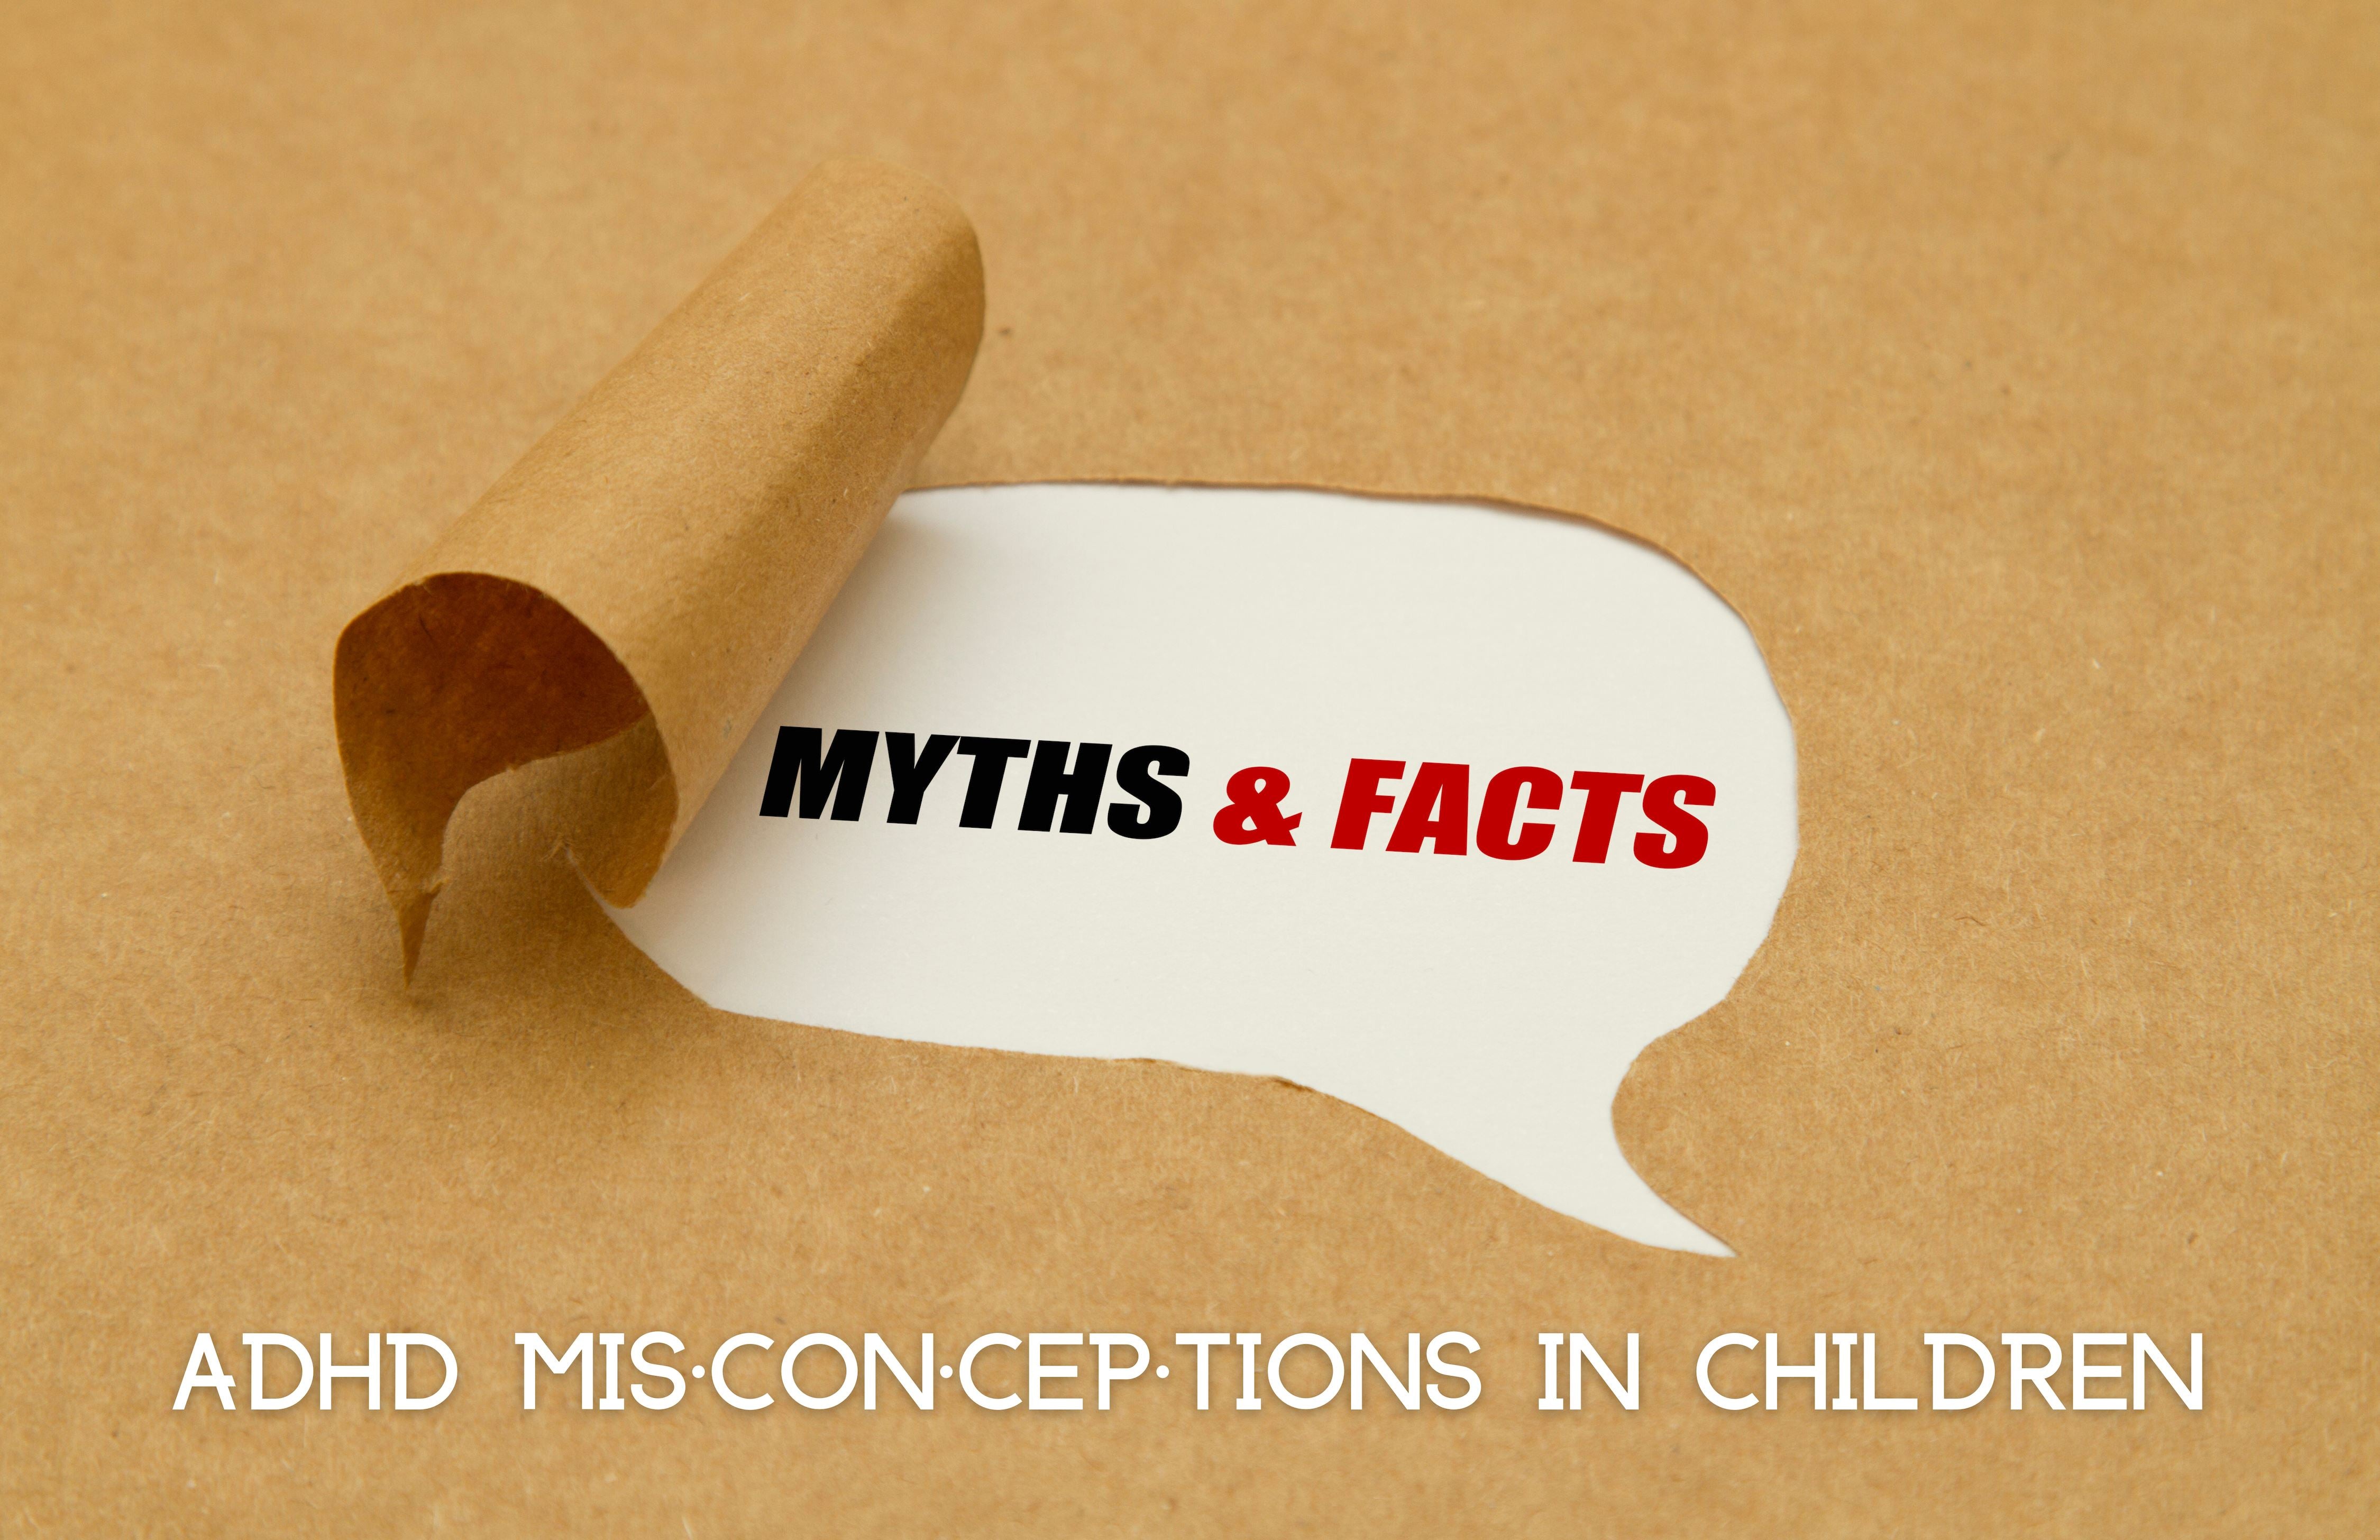 Common ADHD Misconceptions in Kids Common ADHD Myths & Facts